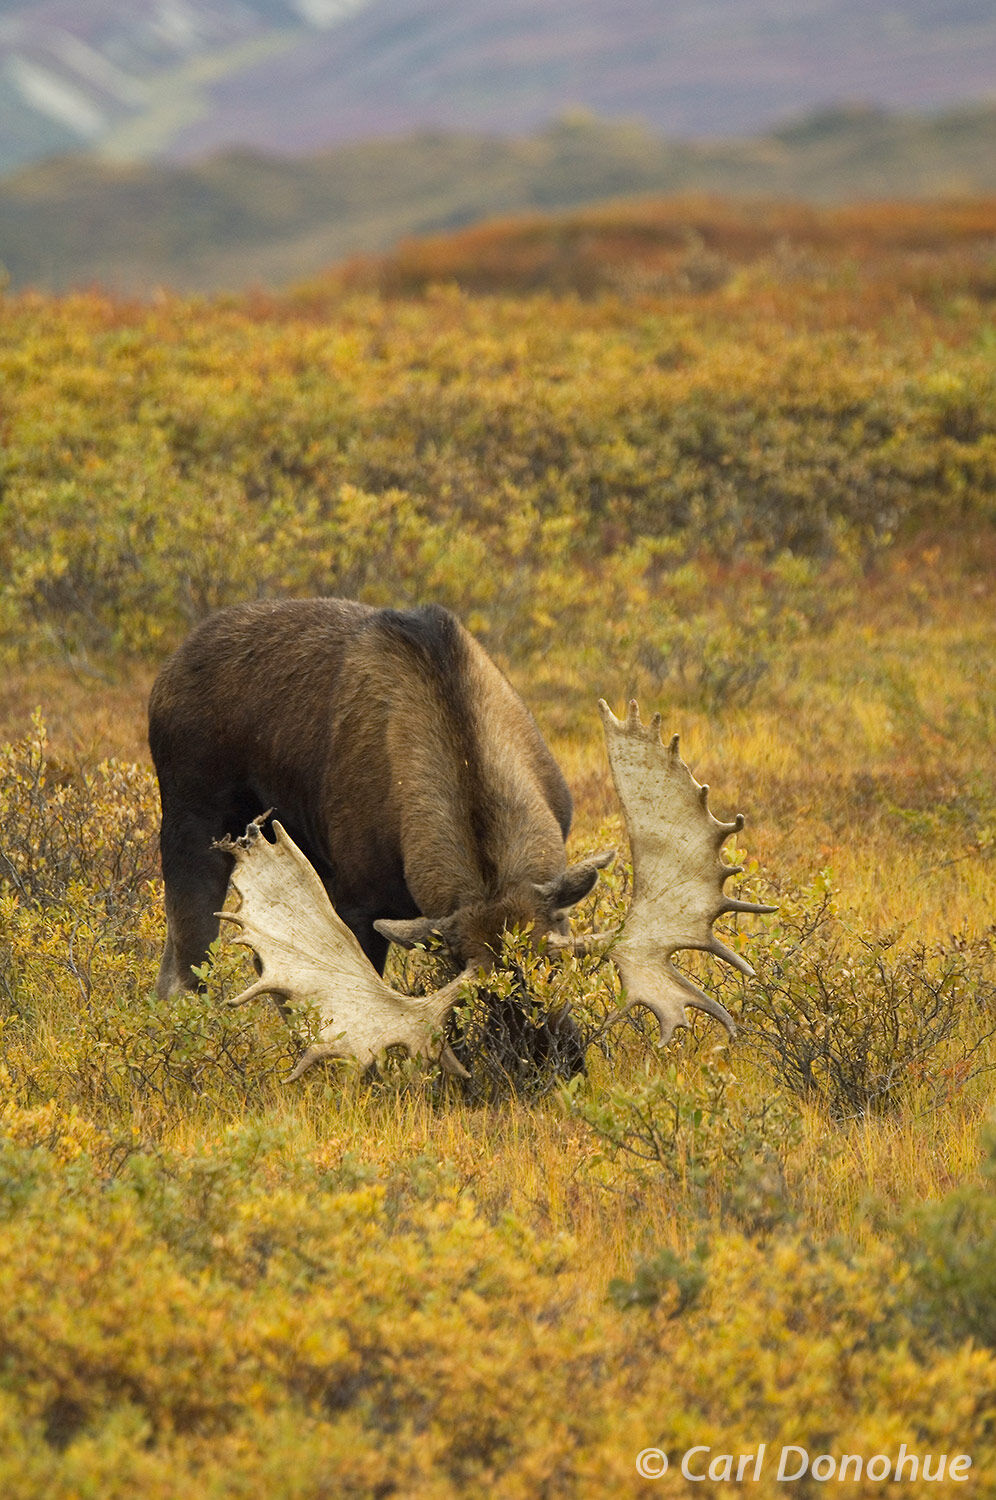 The moose's antlers are lowered, ready to be used as a weapon in this photo of an angry animal. The moose's body is tense, a...